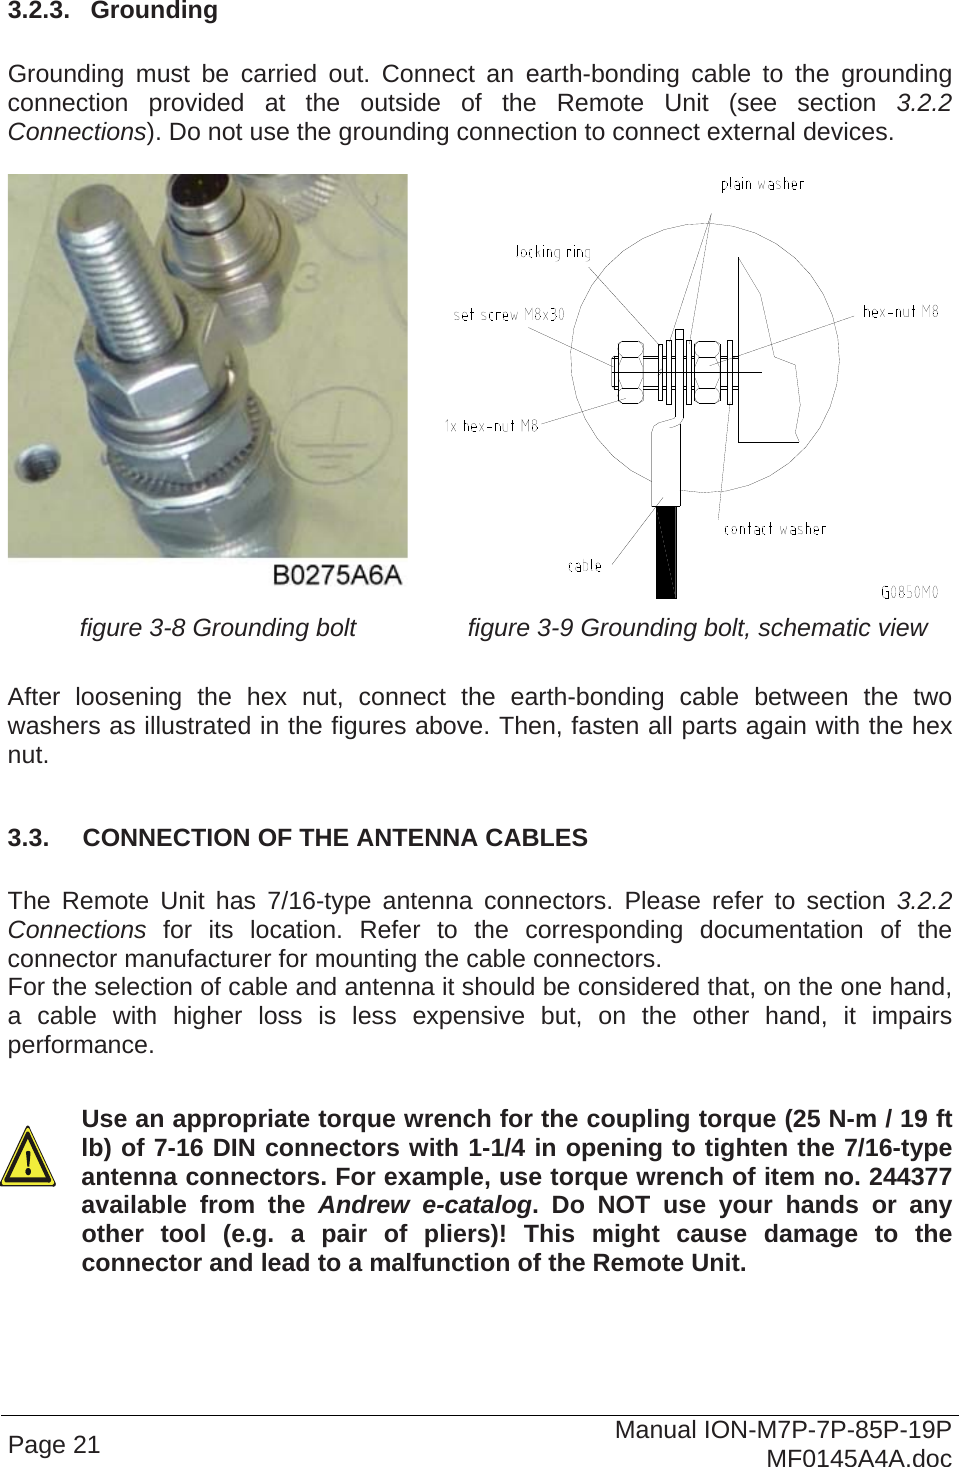  3.2.3.  Grounding  Grounding must be carried out. Connect an earth-bonding cable to the grounding connection provided at the outside of the Remote Unit (see section  3.2.2 Connections). Do not use the grounding connection to connect external devices.    figure 3-8 Grounding bolt  figure 3-9 Grounding bolt, schematic view  After loosening the hex nut, connect the earth-bonding cable between the two washers as illustrated in the figures above. Then, fasten all parts again with the hex nut.  3.3.  CONNECTION OF THE ANTENNA CABLES  The Remote Unit has 7/16-type antenna connectors. Please refer to section 3.2.2 Connections for its location. Refer to the corresponding documentation of the connector manufacturer for mounting the cable connectors.  For the selection of cable and antenna it should be considered that, on the one hand, a cable with higher loss is less expensive but, on the other hand, it impairs performance.  Use an appropriate torque wrench for the coupling torque (25 N-m / 19 ft lb) of 7-16 DIN connectors with 1-1/4 in opening to tighten the 7/16-type antenna connectors. For example, use torque wrench of item no. 244377 available from the Andrew e-catalog. Do NOT use your hands or any other tool (e.g. a pair of pliers)! This might cause damage to the connector and lead to a malfunction of the Remote Unit. Page 21  Manual ION-M7P-7P-85P-19P MF0145A4A.doc 